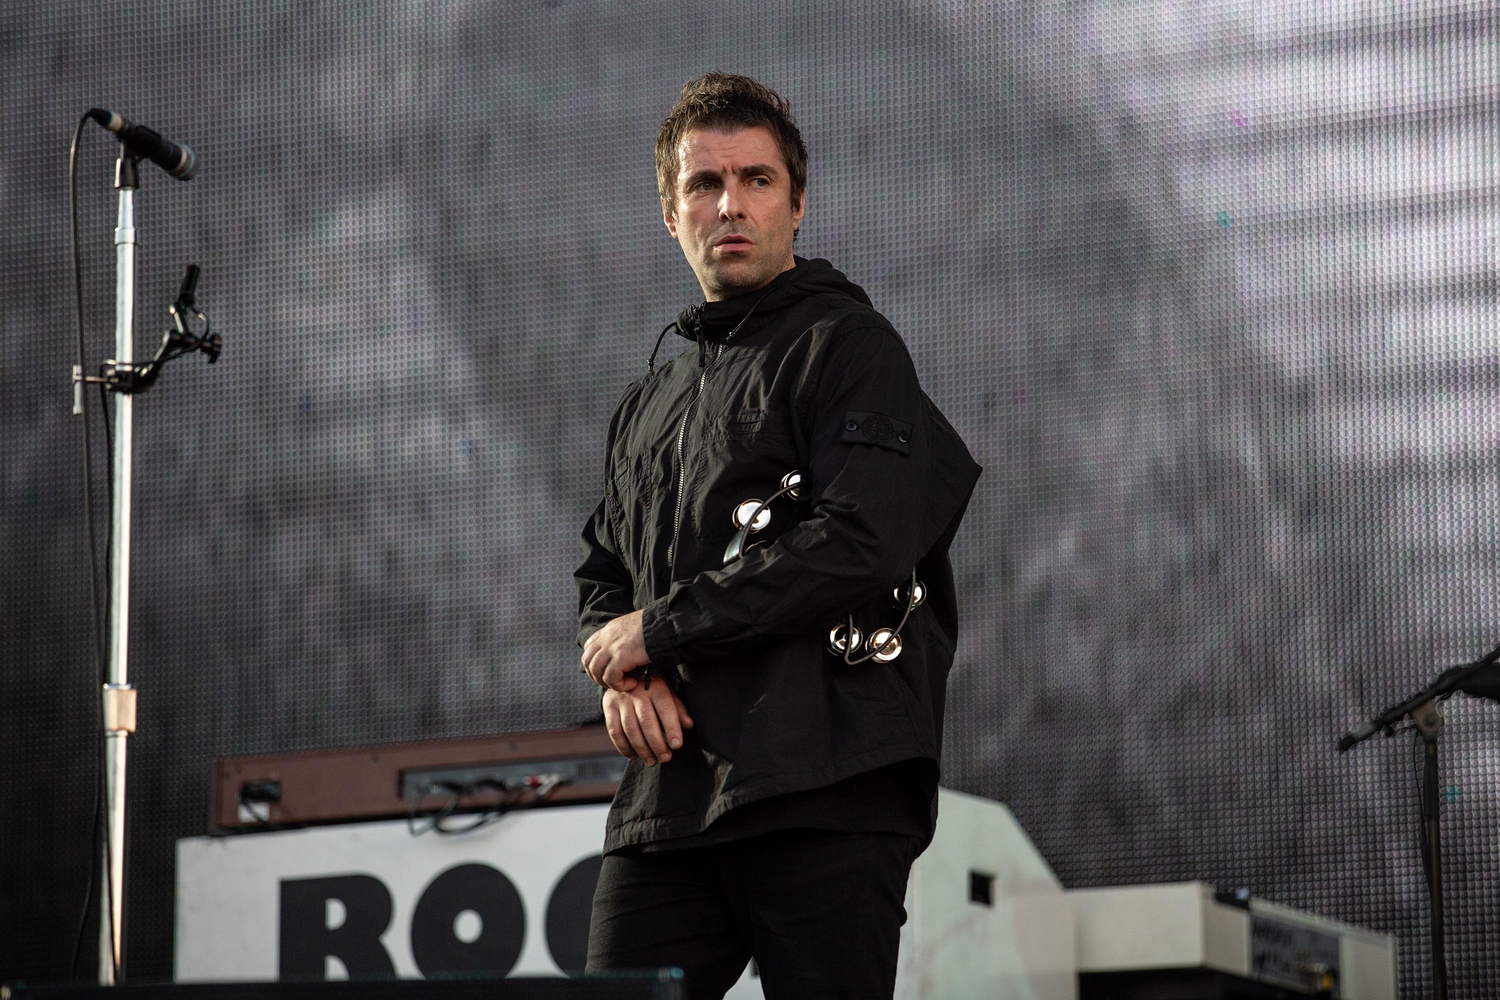 Liam Gallagher’s ‘As It Was’ film to come to UK cinemas in June